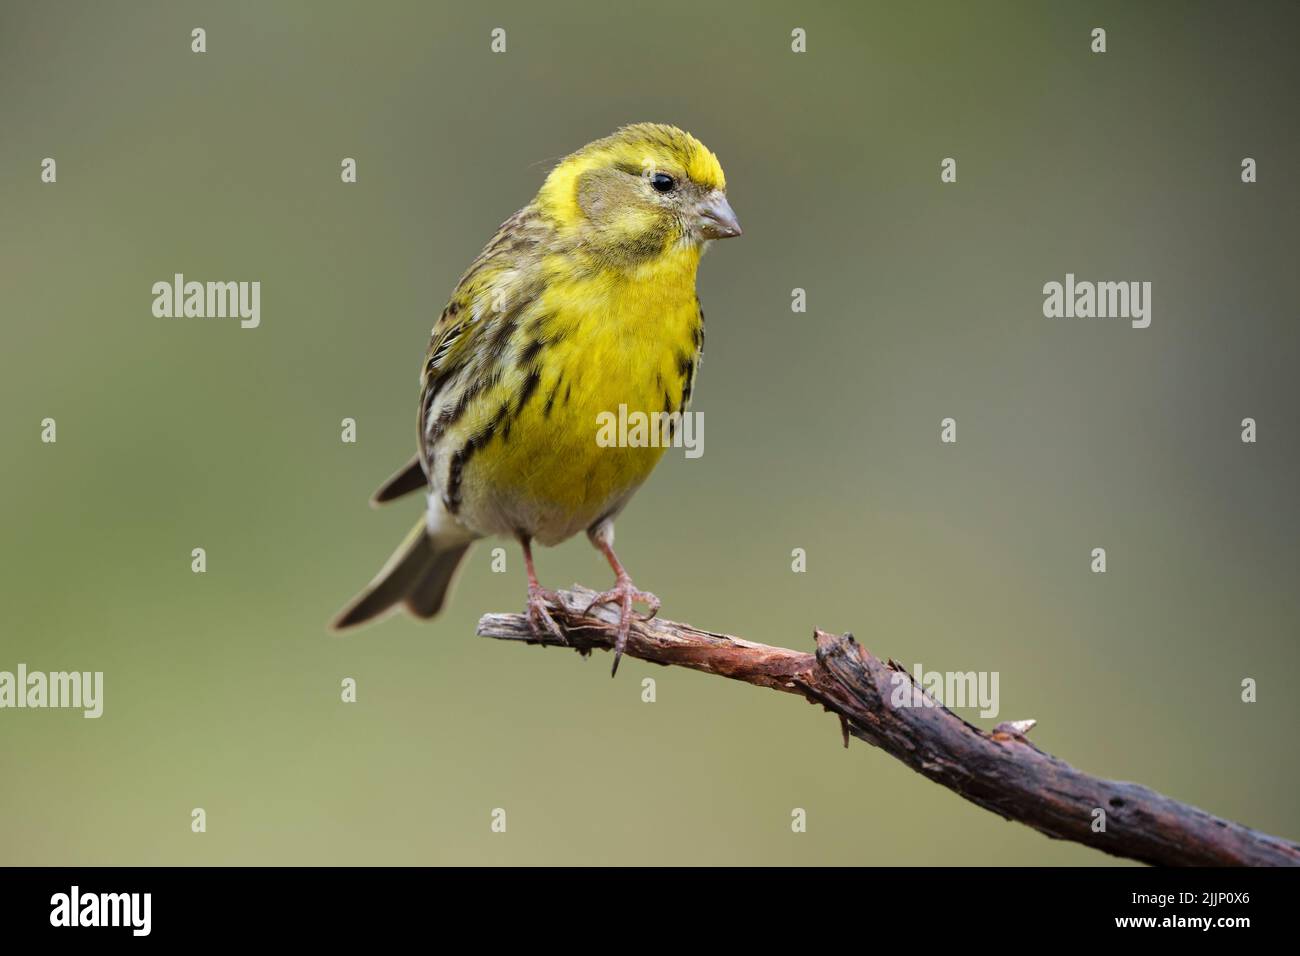 Wild European serin bird with yellow plumage sitting on tip of thin branch on blurred background of countryside Stock Photo